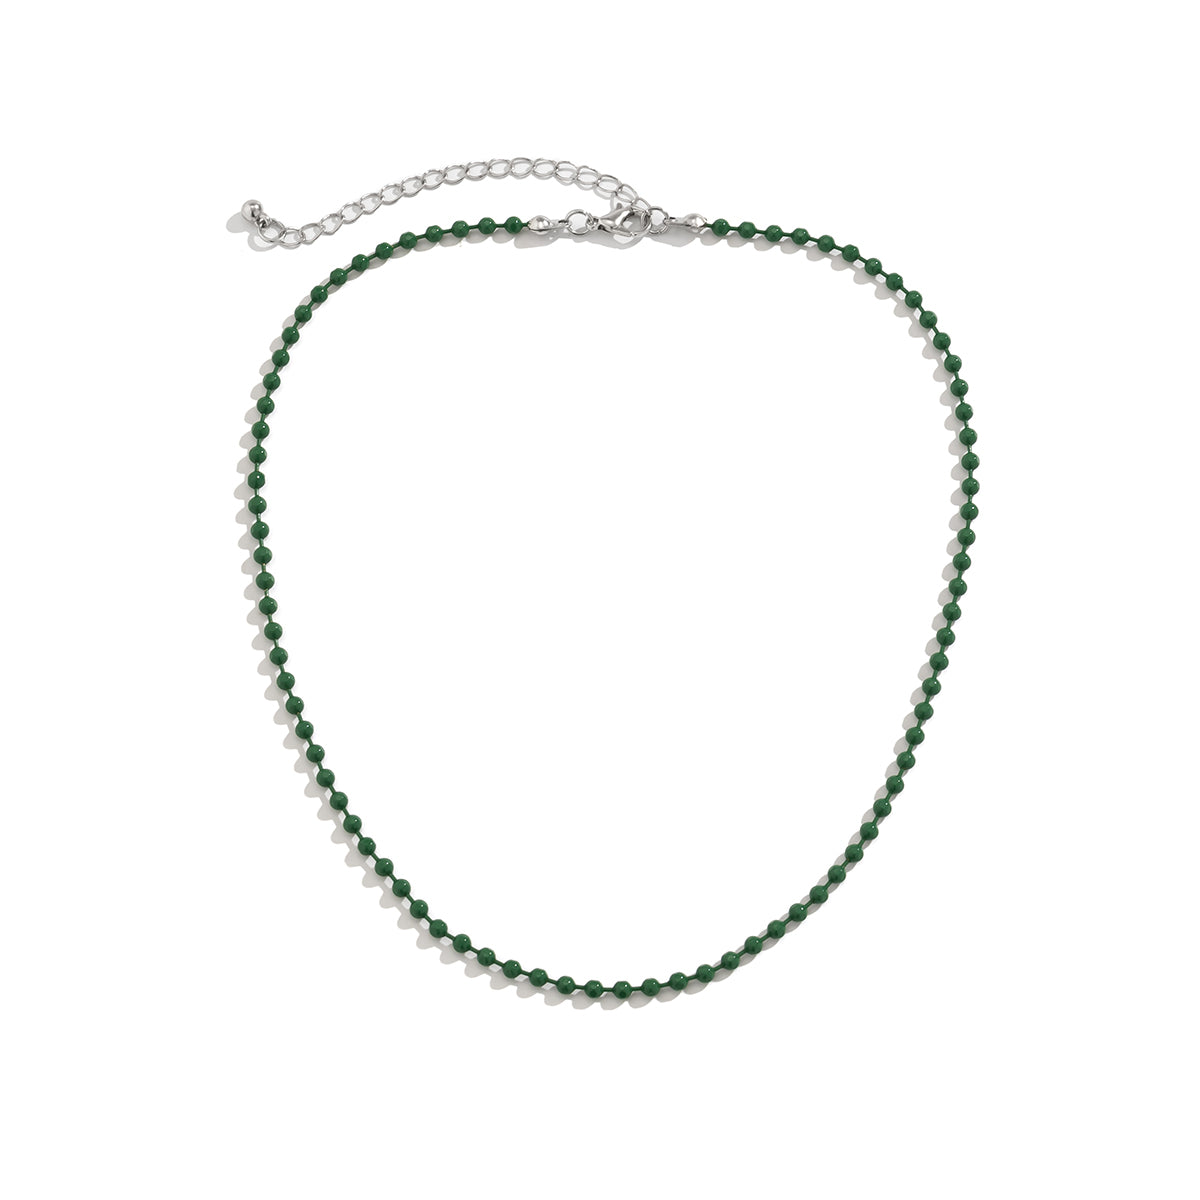 Green Enamel & Silver-Plated Bead Chain Necklace